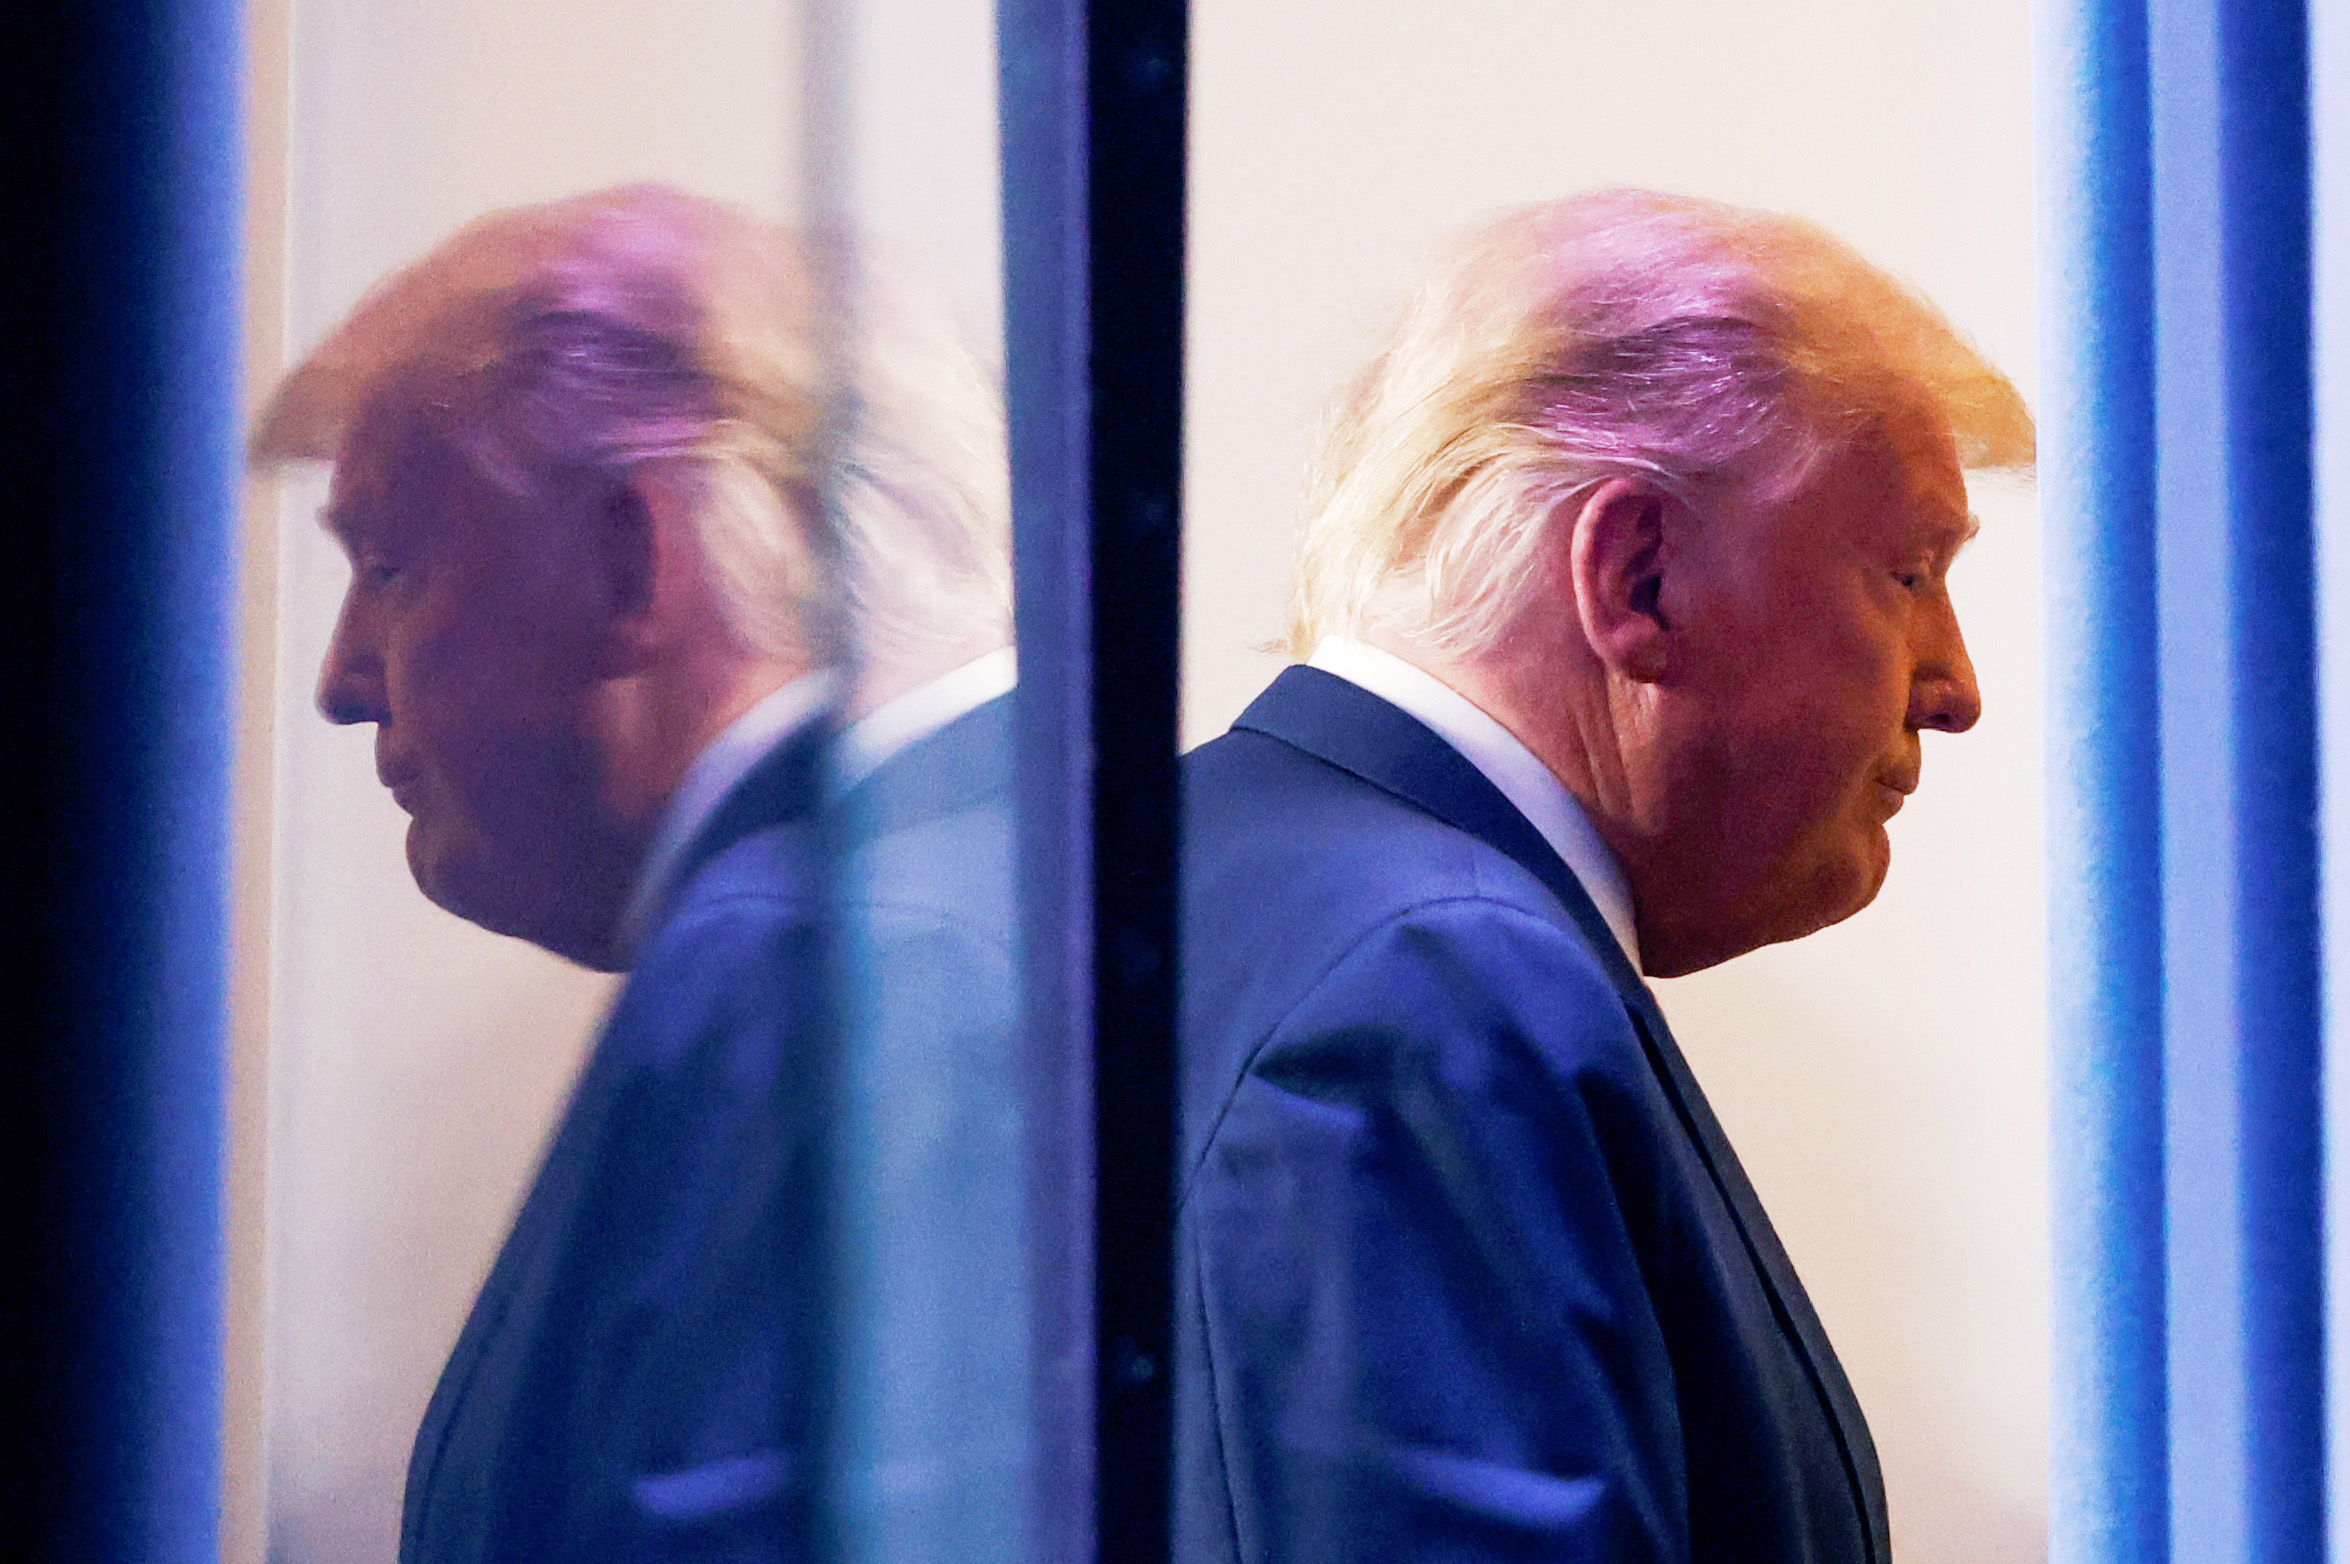 PHOTO: President Donald Trump is reflected as he departs after speaking about the 2020 U.S. presidential election results in the Brady Press Briefing Room at the White House, Nov. 5, 2020.